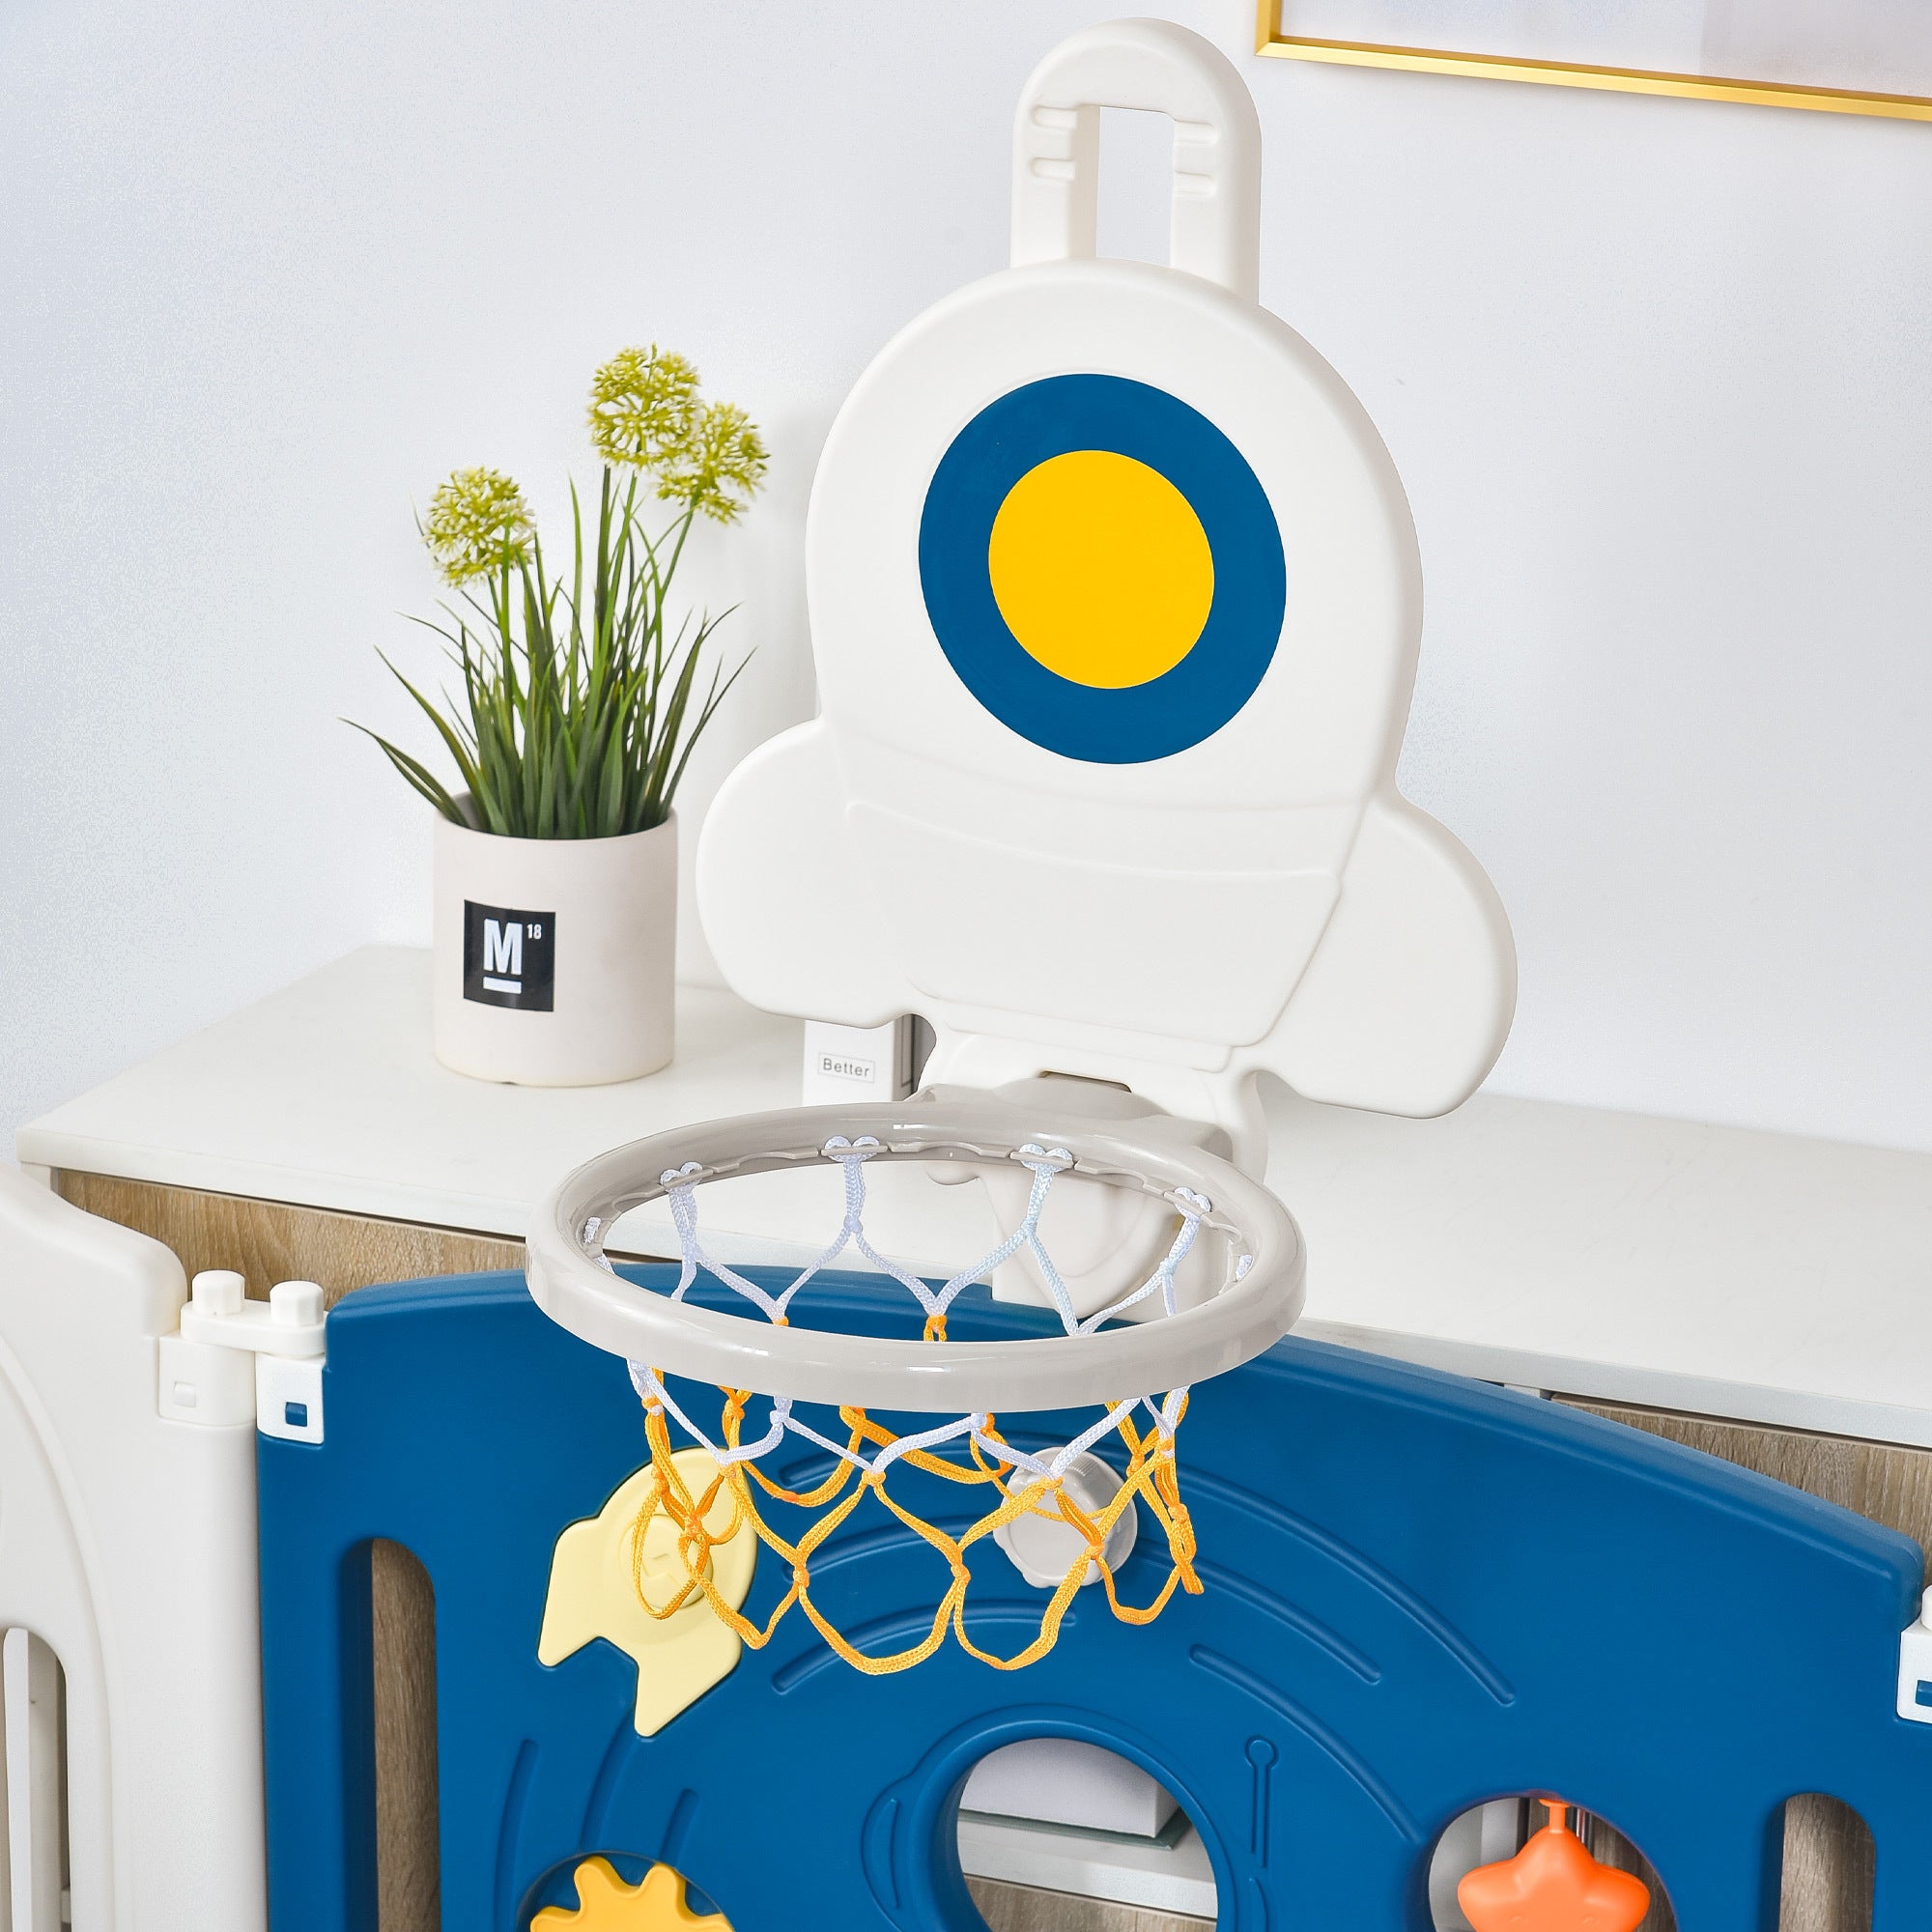 Baby Playpen for Toddler, Astronaut Theme